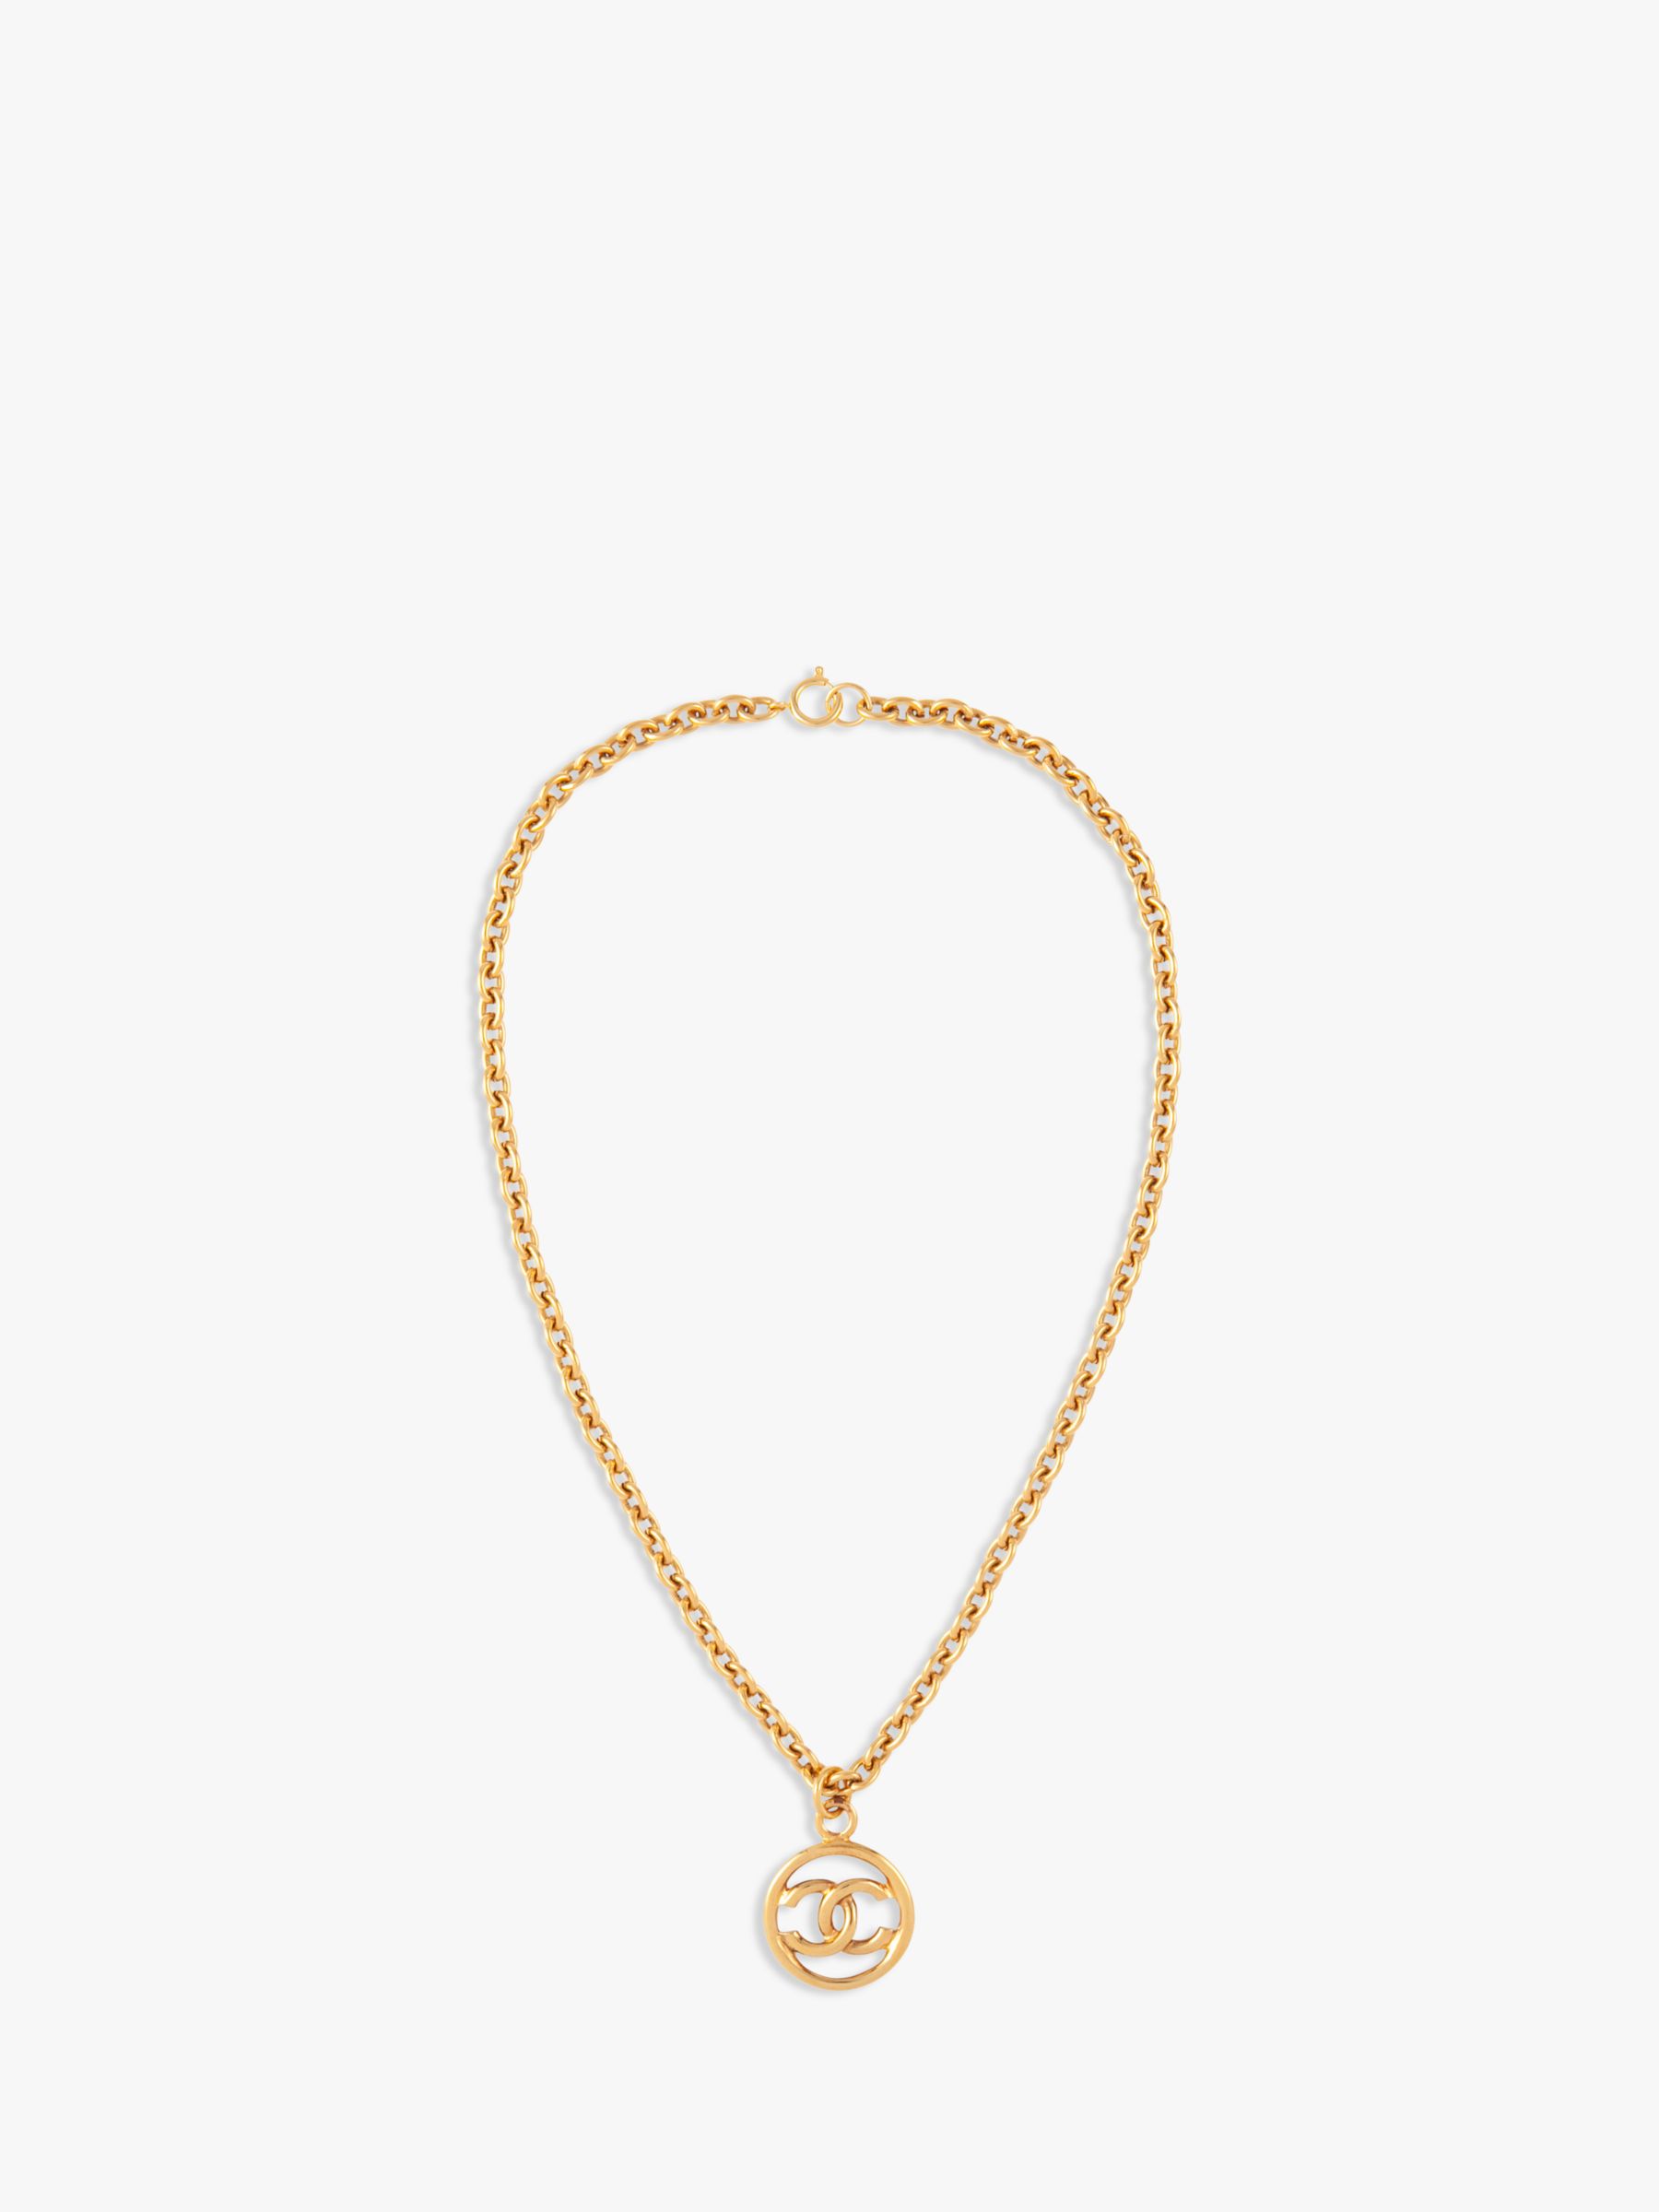 Susan Caplan Vintage Chanel Gold Plated CC Logo Pendant Necklace, Dated 1999